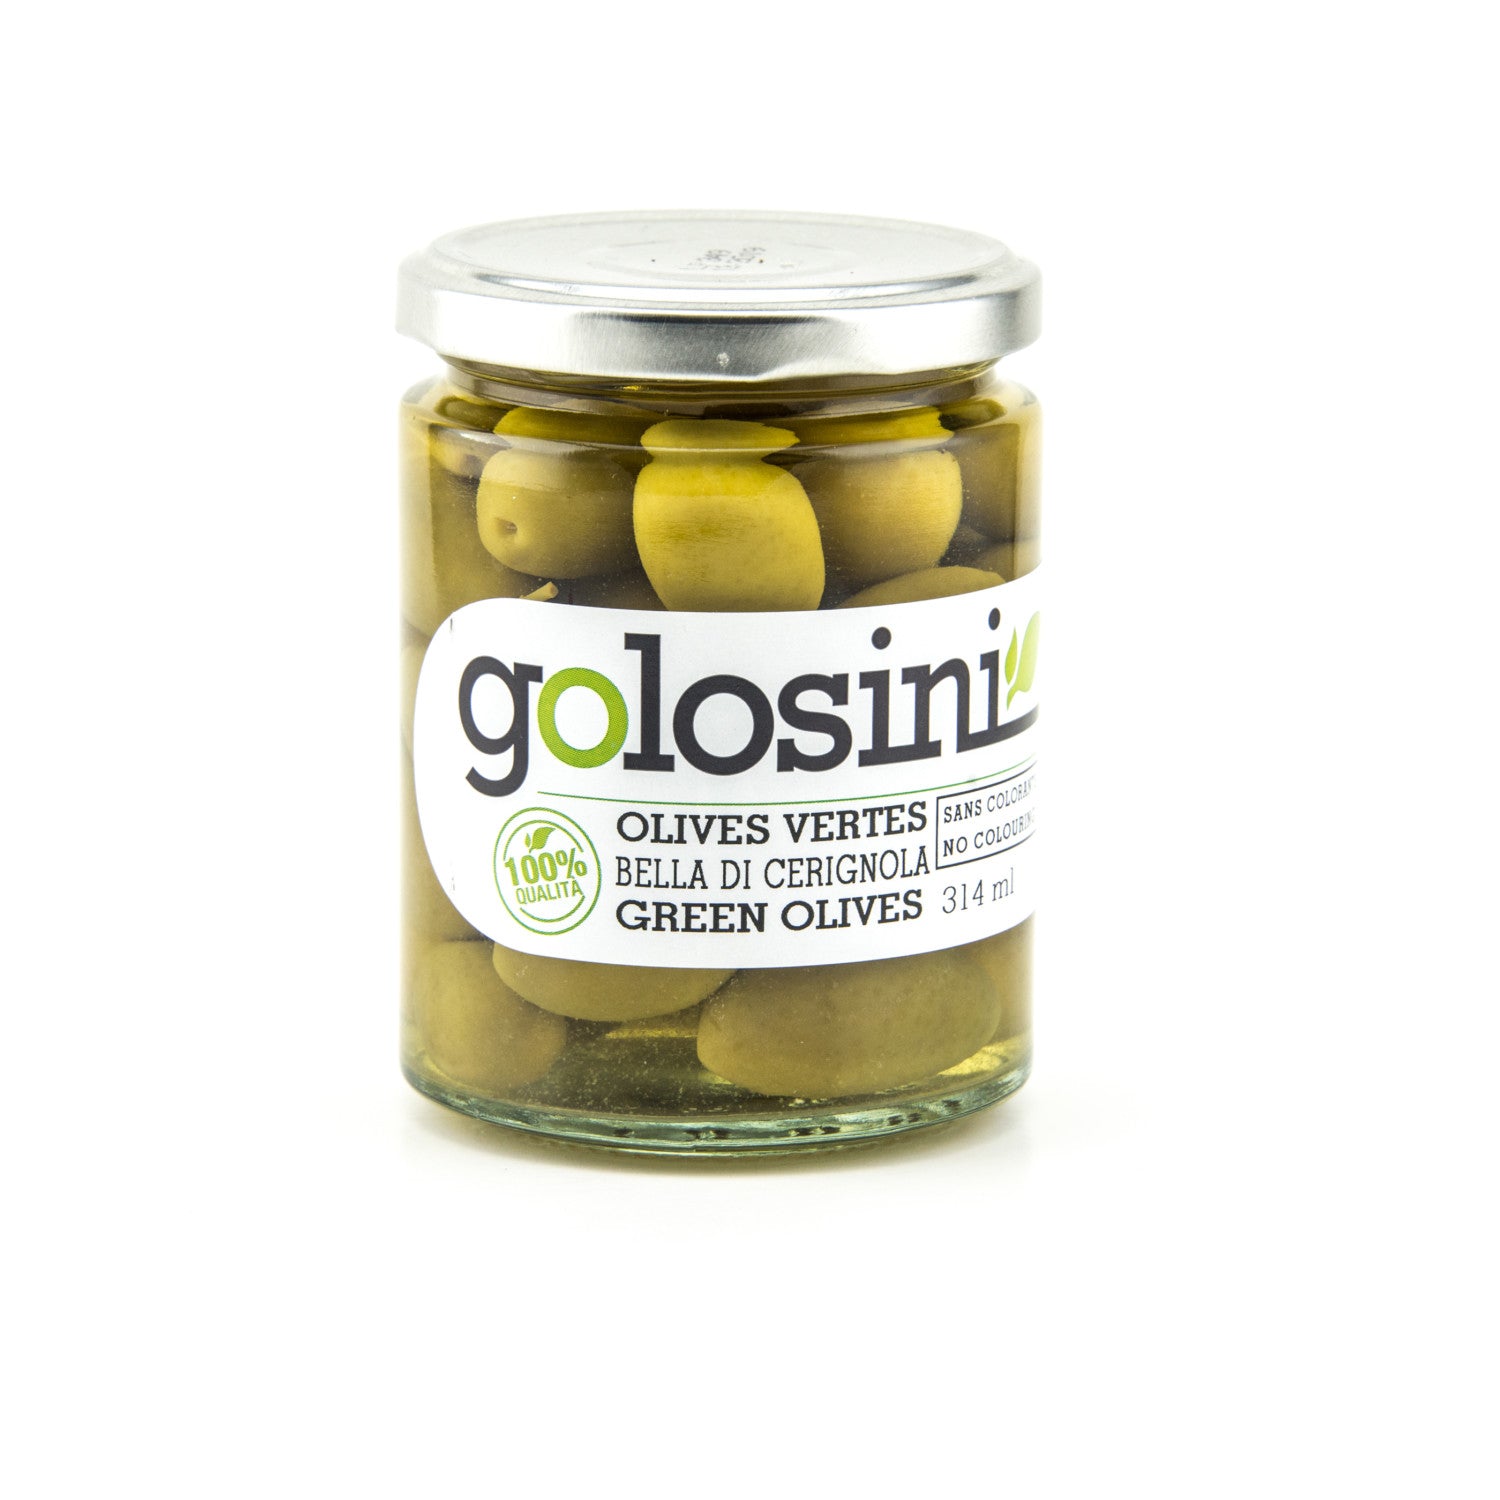 Green Olives by Golosini (314 ml)